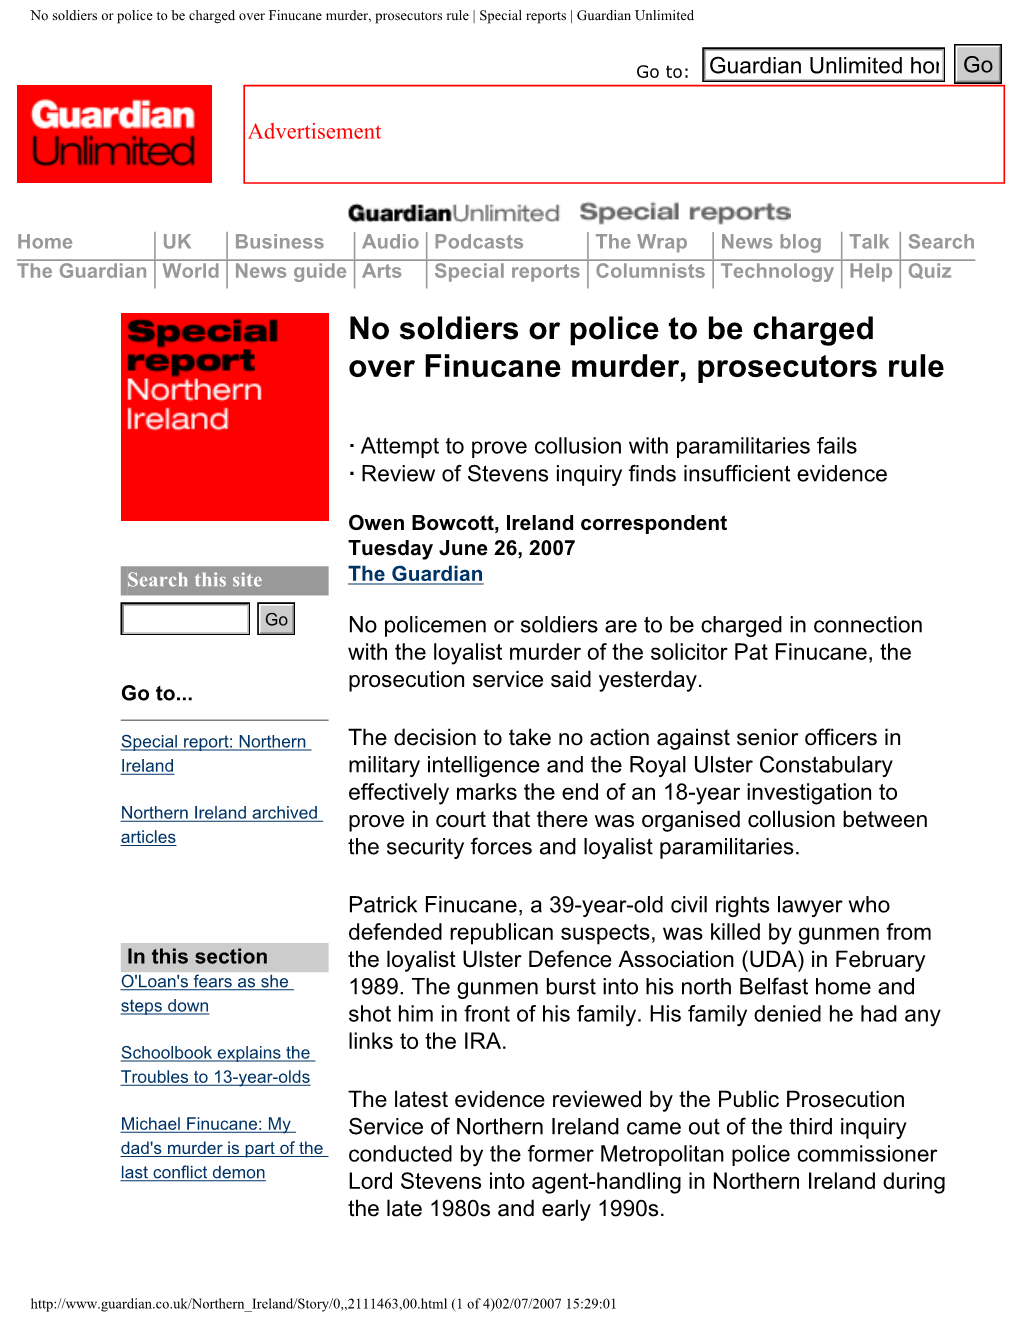 No Soldiers Or Police to Be Charged Over Finucane Murder, Prosecutors Rule | Special Reports | Guardian Unlimited